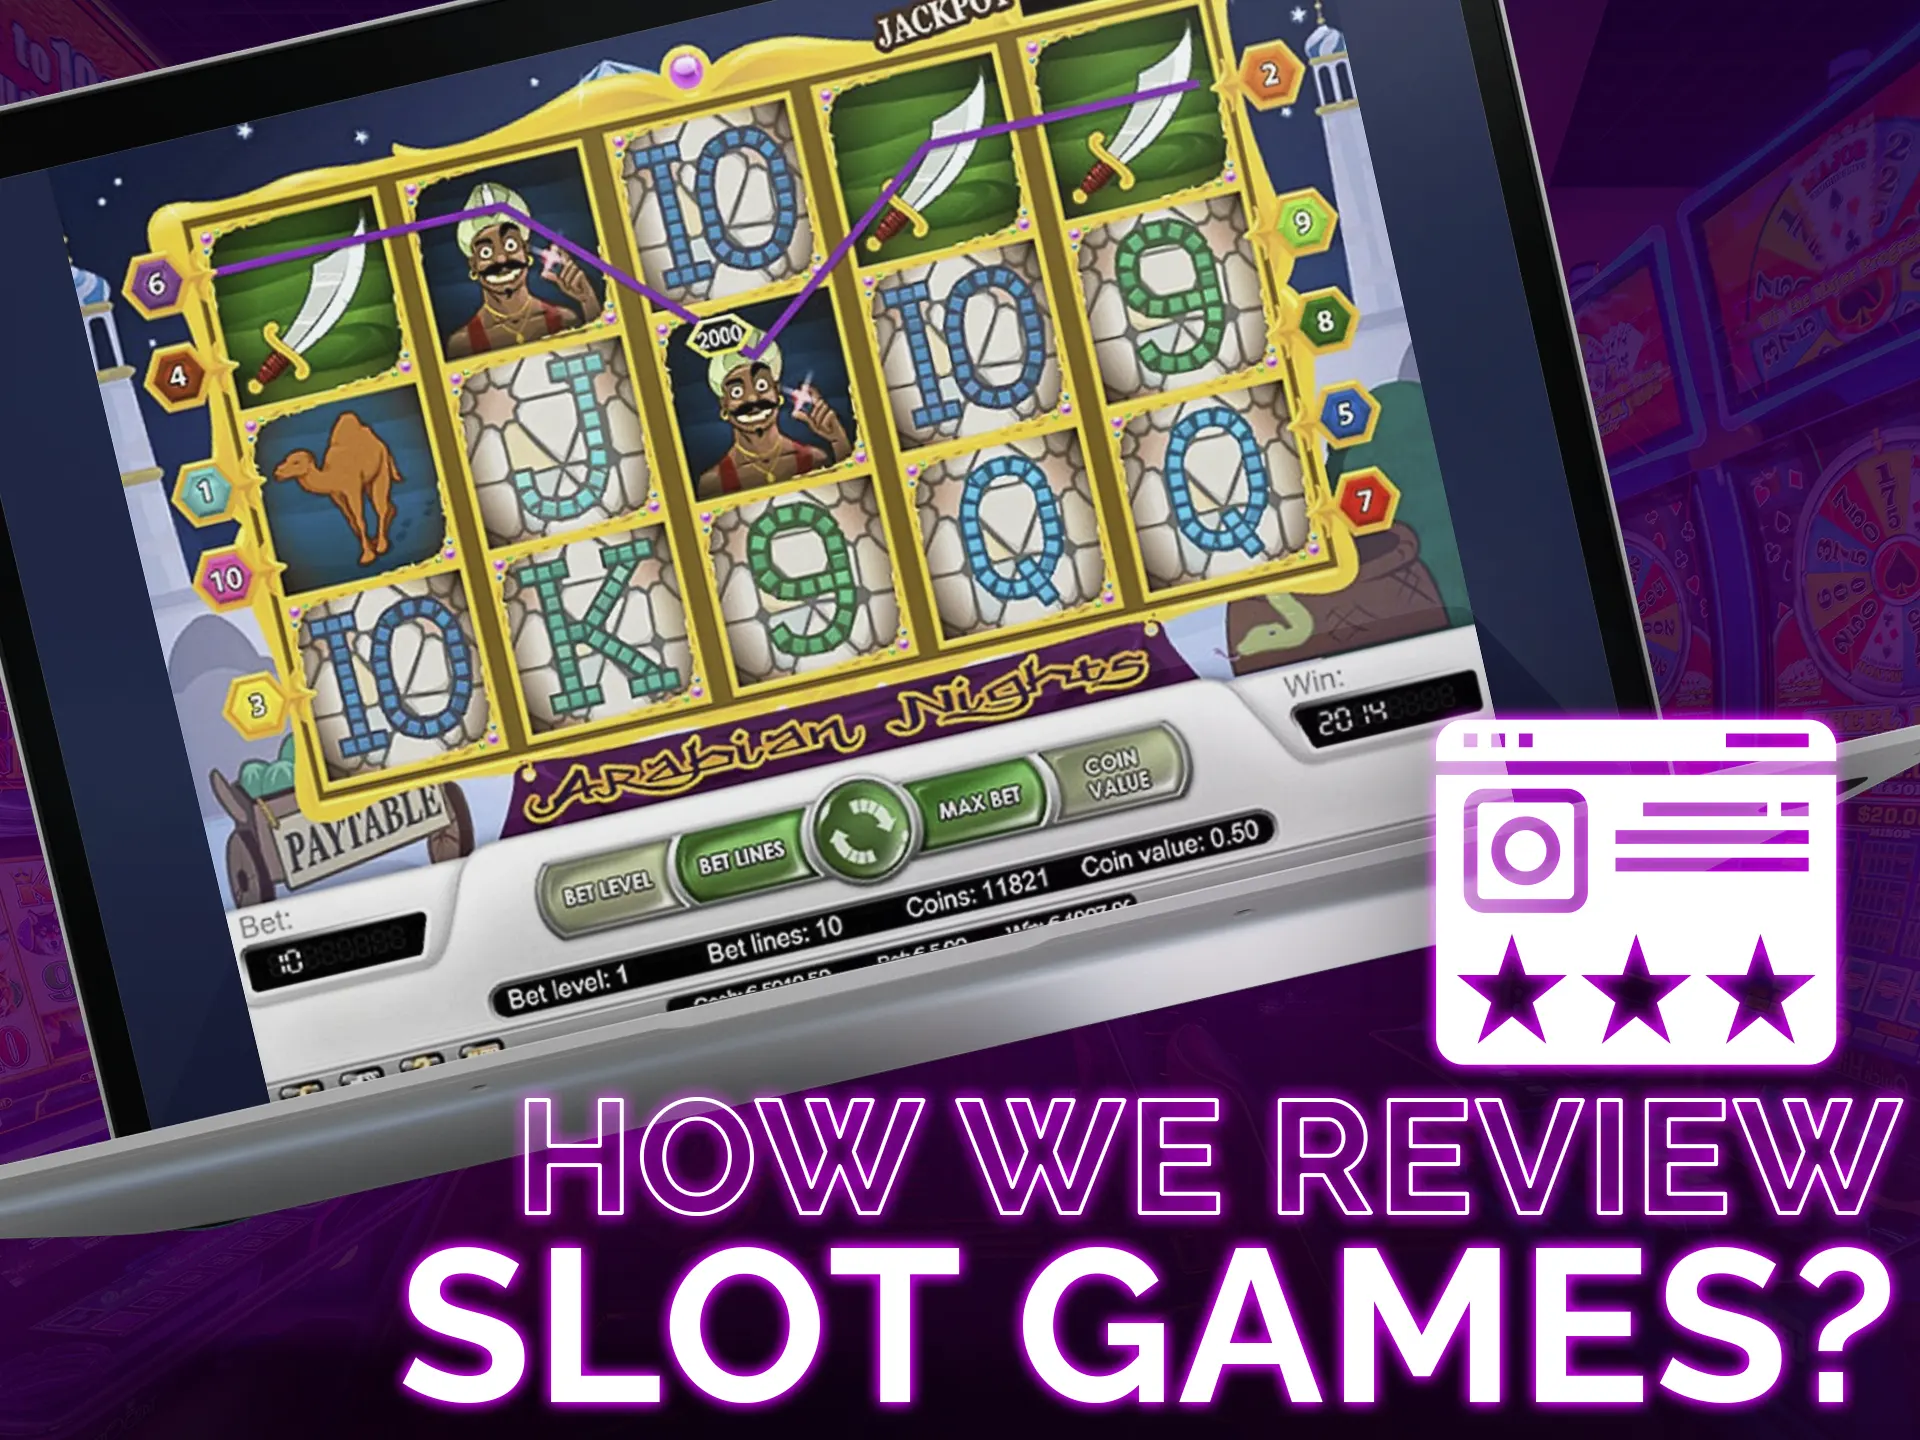 From our article, you will learn how to choose a slot game carefully.